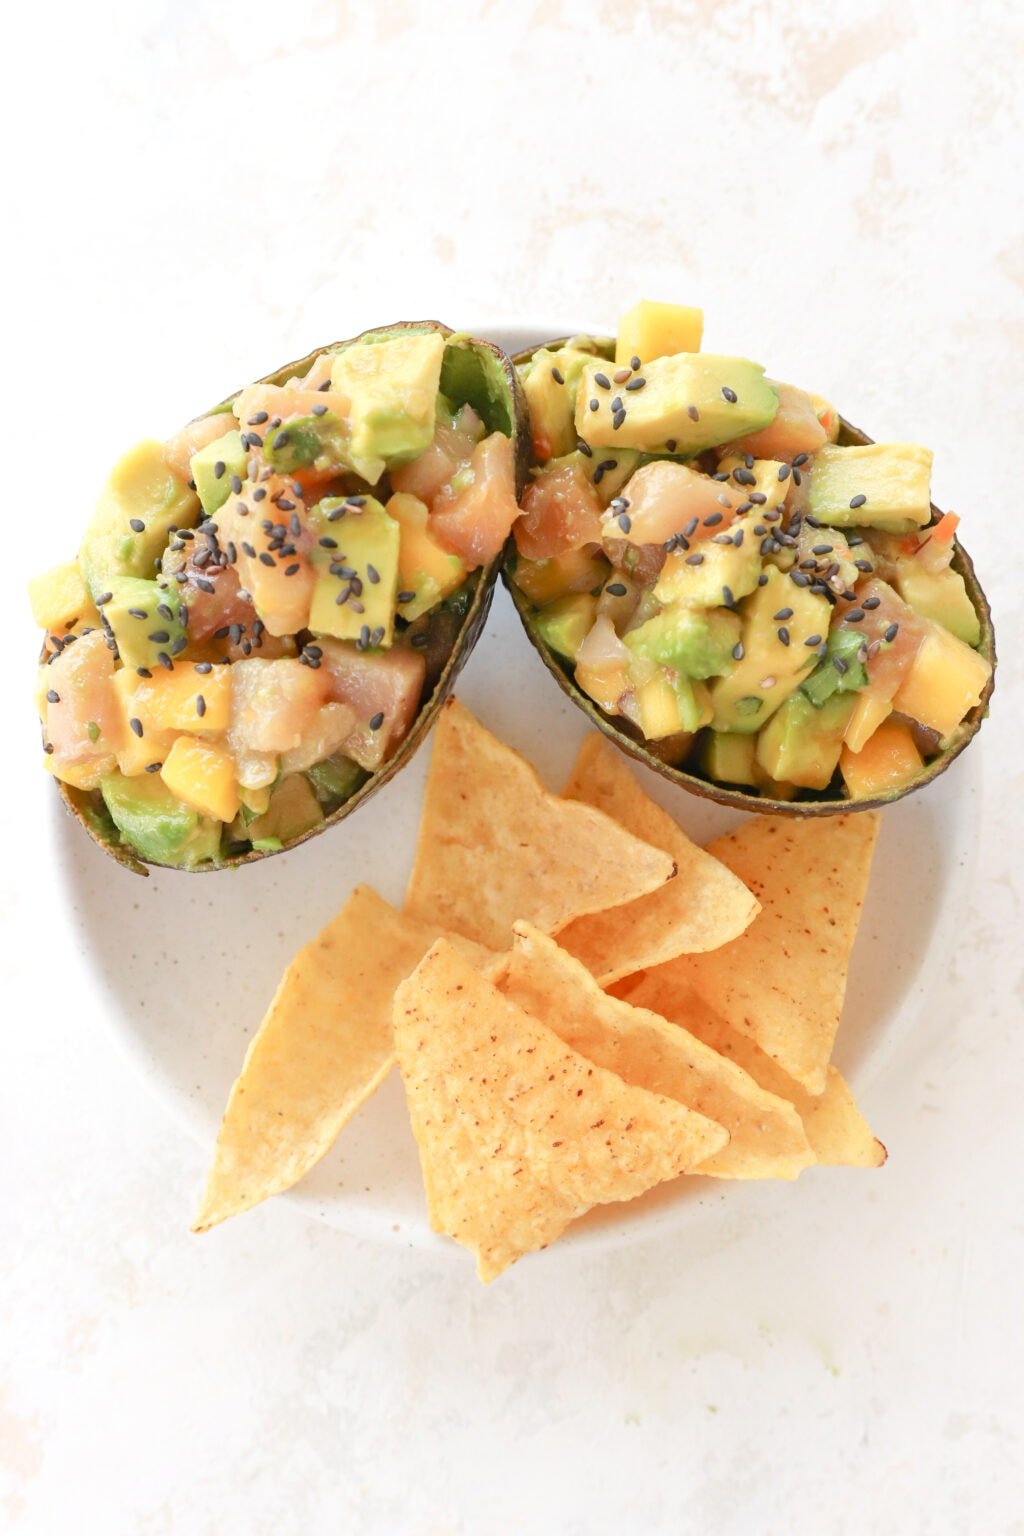 Two avocados are on a white plate. The avocados are stuffed with cubed avocado, cubed raw tuna, mango habanero salsa and topped with black sesame seeds. Below them on the plate are tortilla chips.